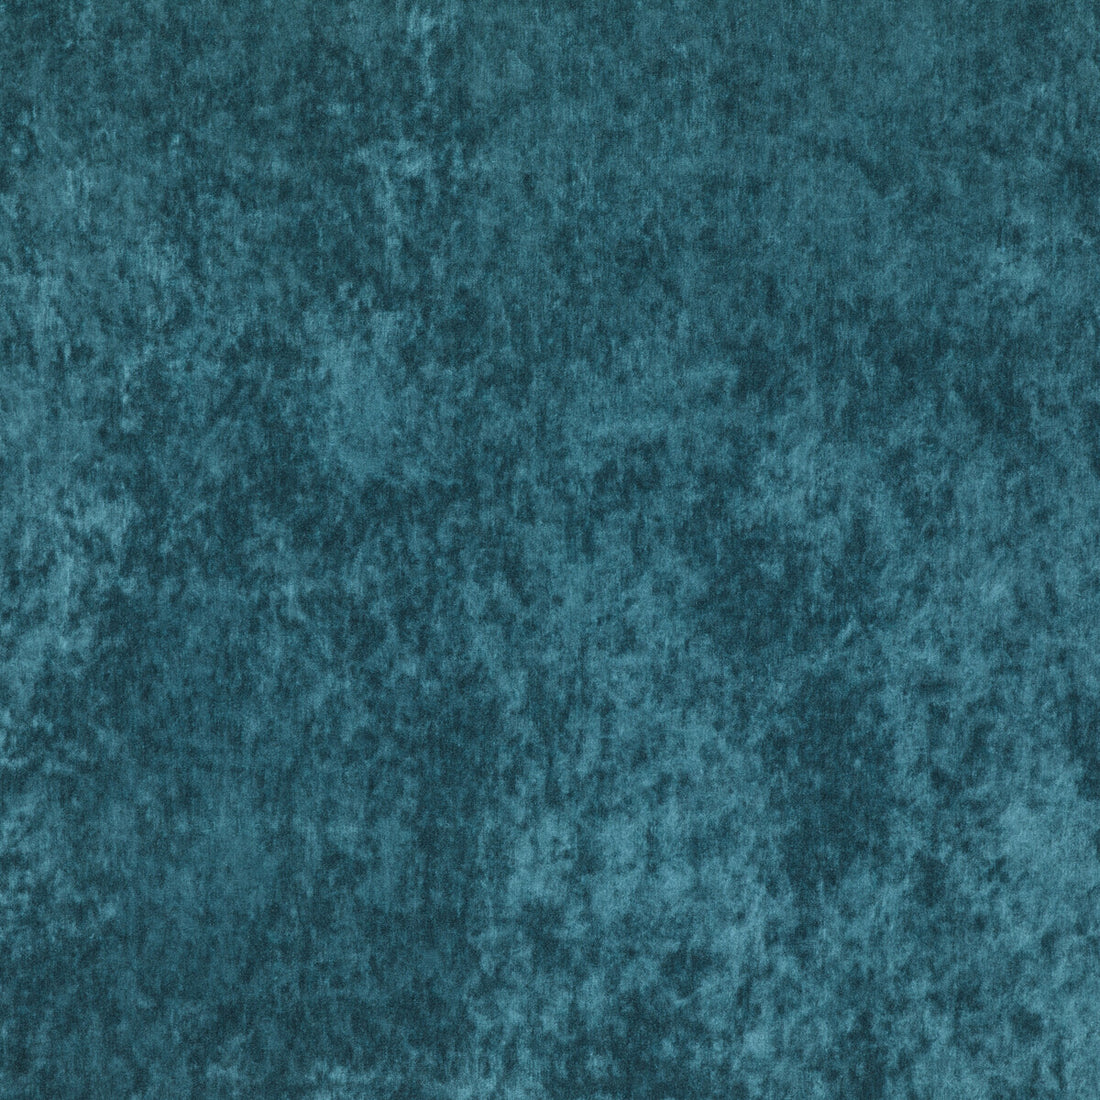 Keswick Plain fabric in teal color - pattern BF10785.615.0 - by G P &amp; J Baker in the Keswick Velvets collection